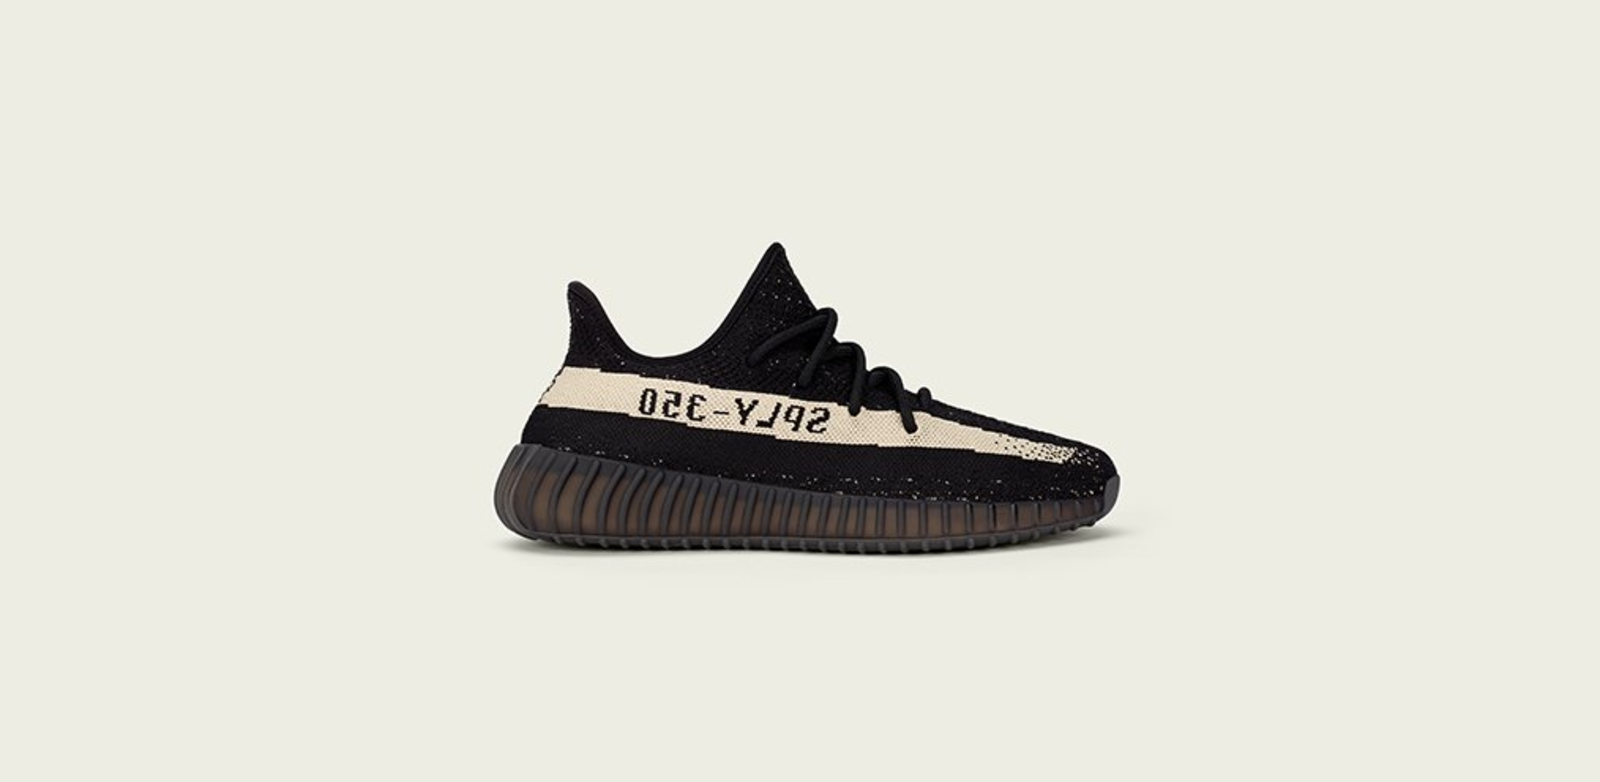 top-10 adidas yeezy boost 350 v2s